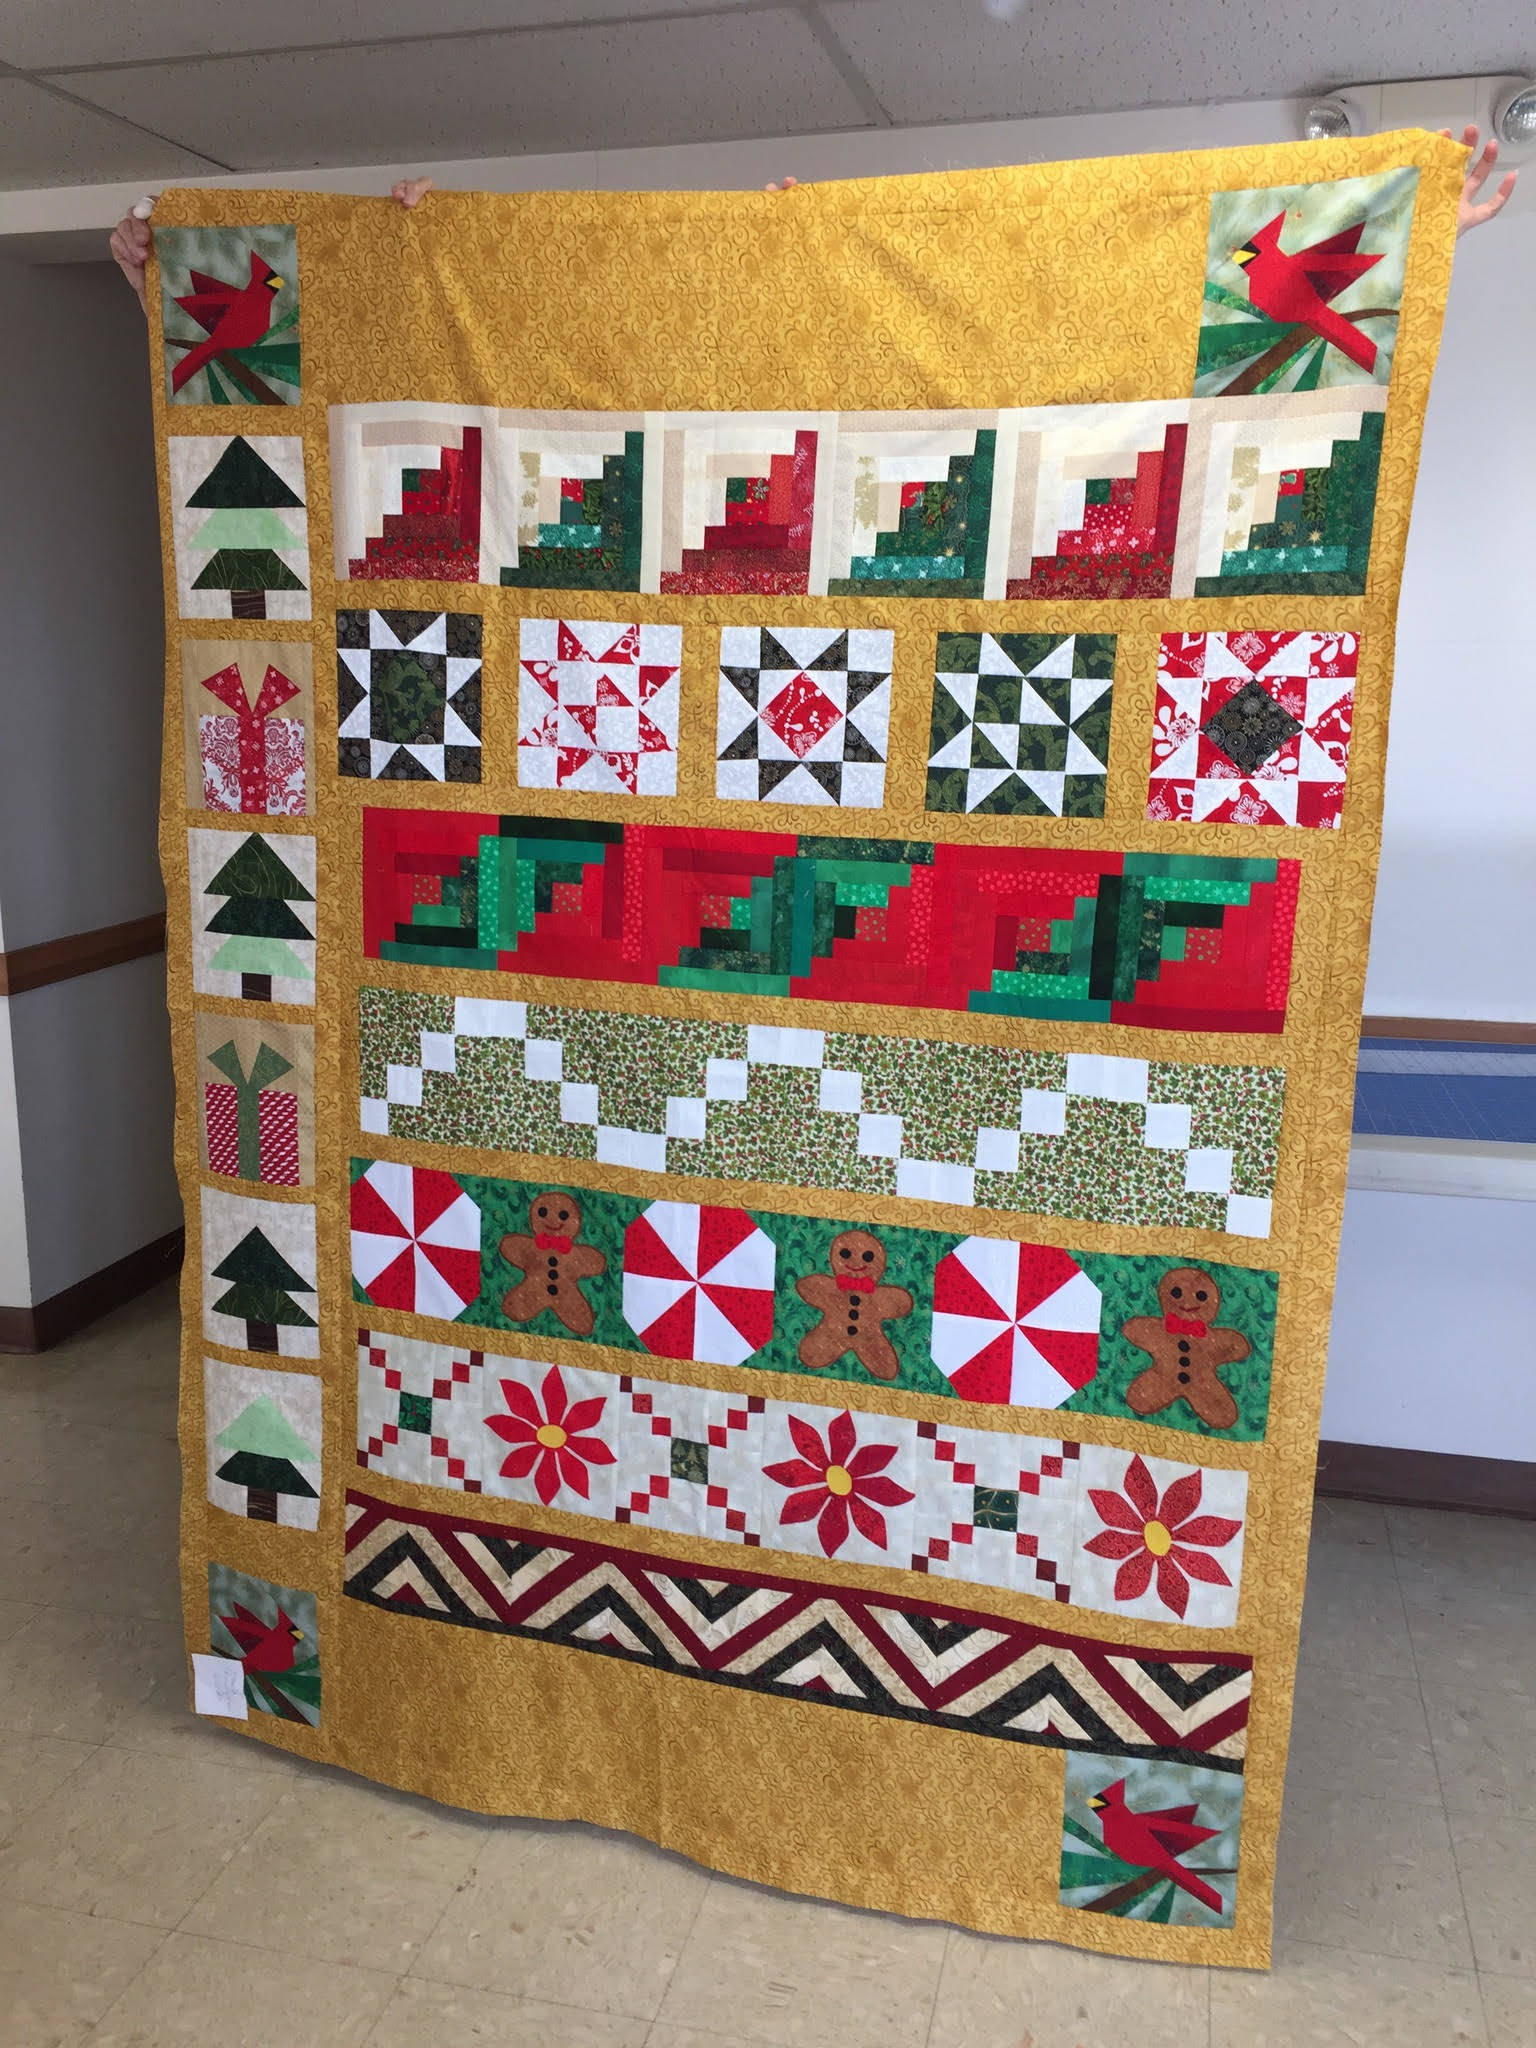 One of the quilts from “9 Women/9 Quilts,” on exhibit at the Homer Council on the Arts. (Photo provided)